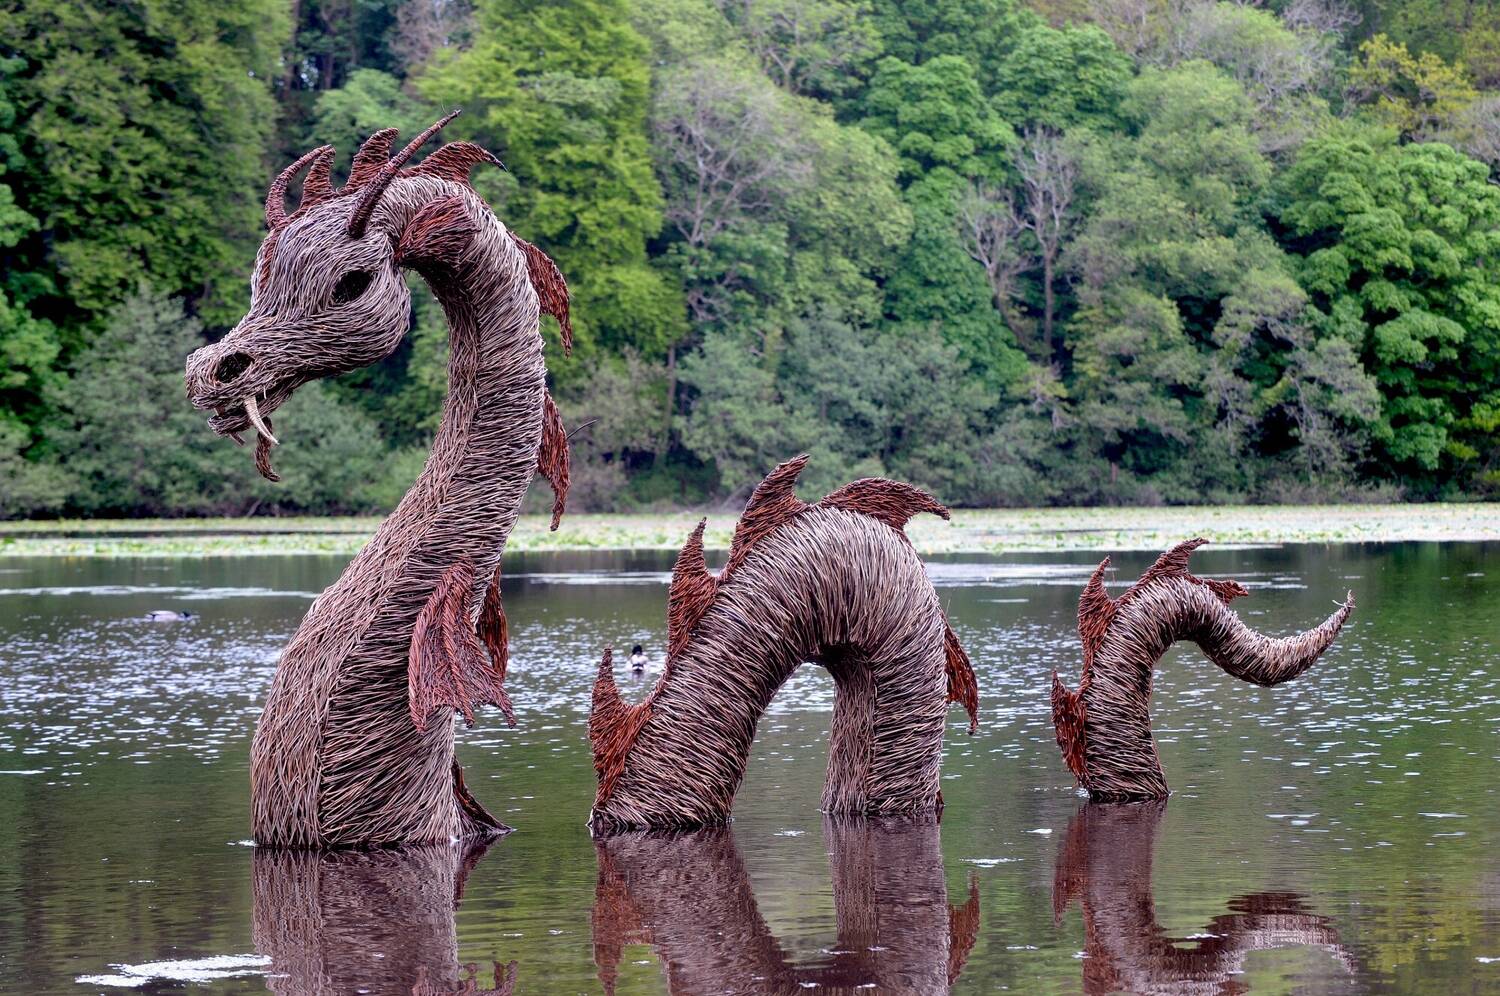 A willow sculpture that looks like the Loch Ness monster is in a large pond, half in, half out of the water.